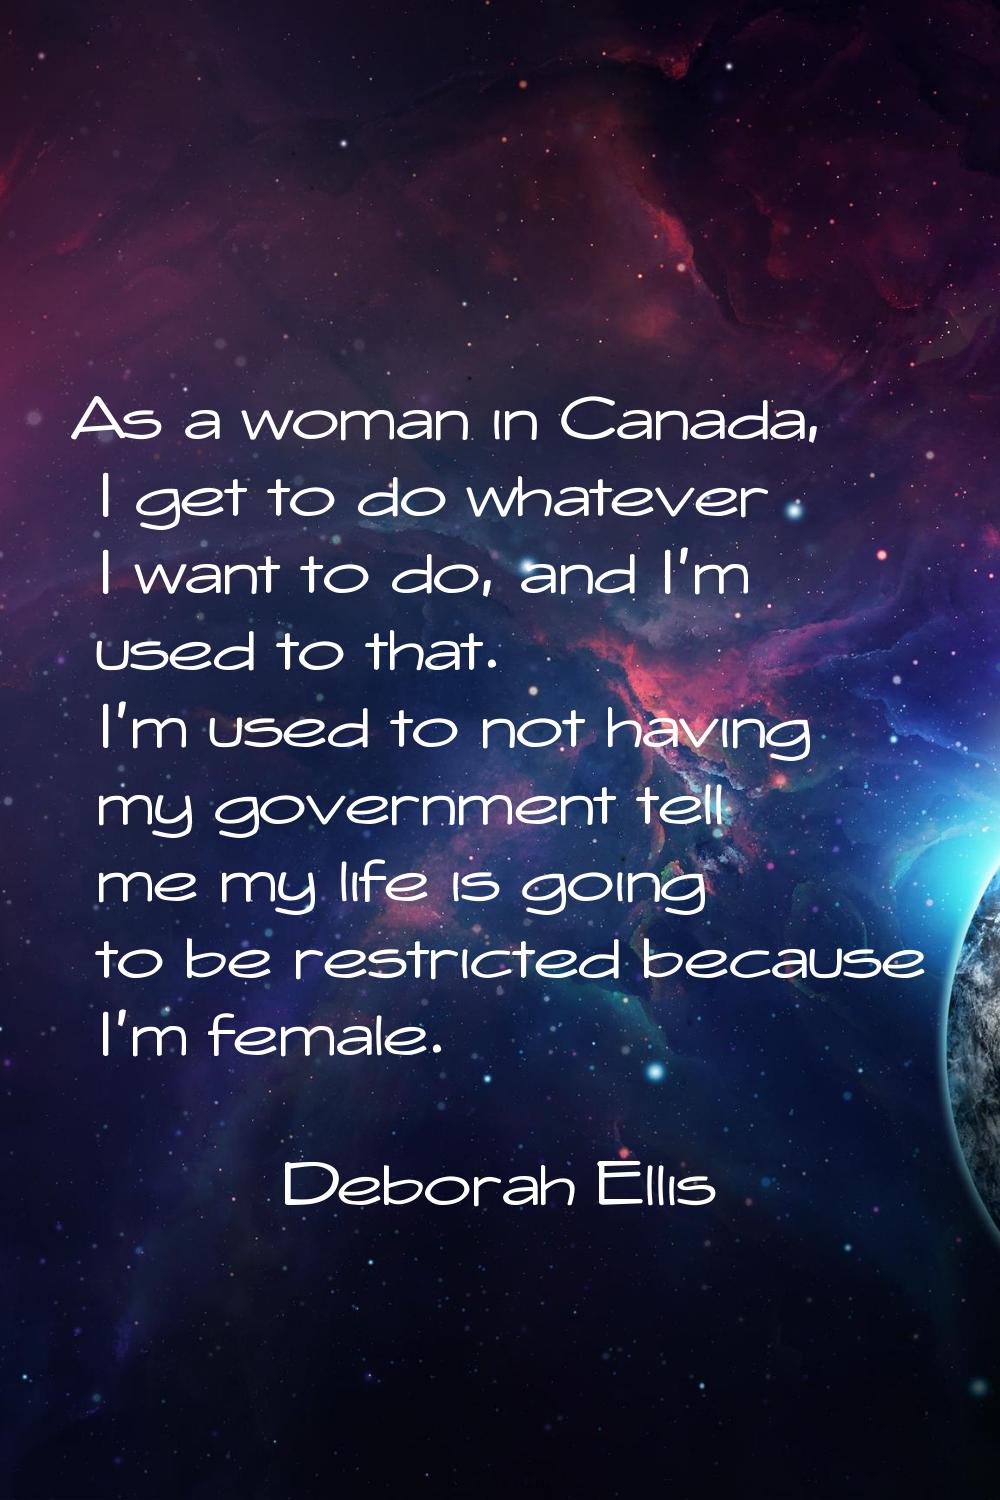 As a woman in Canada, I get to do whatever I want to do, and I'm used to that. I'm used to not havi